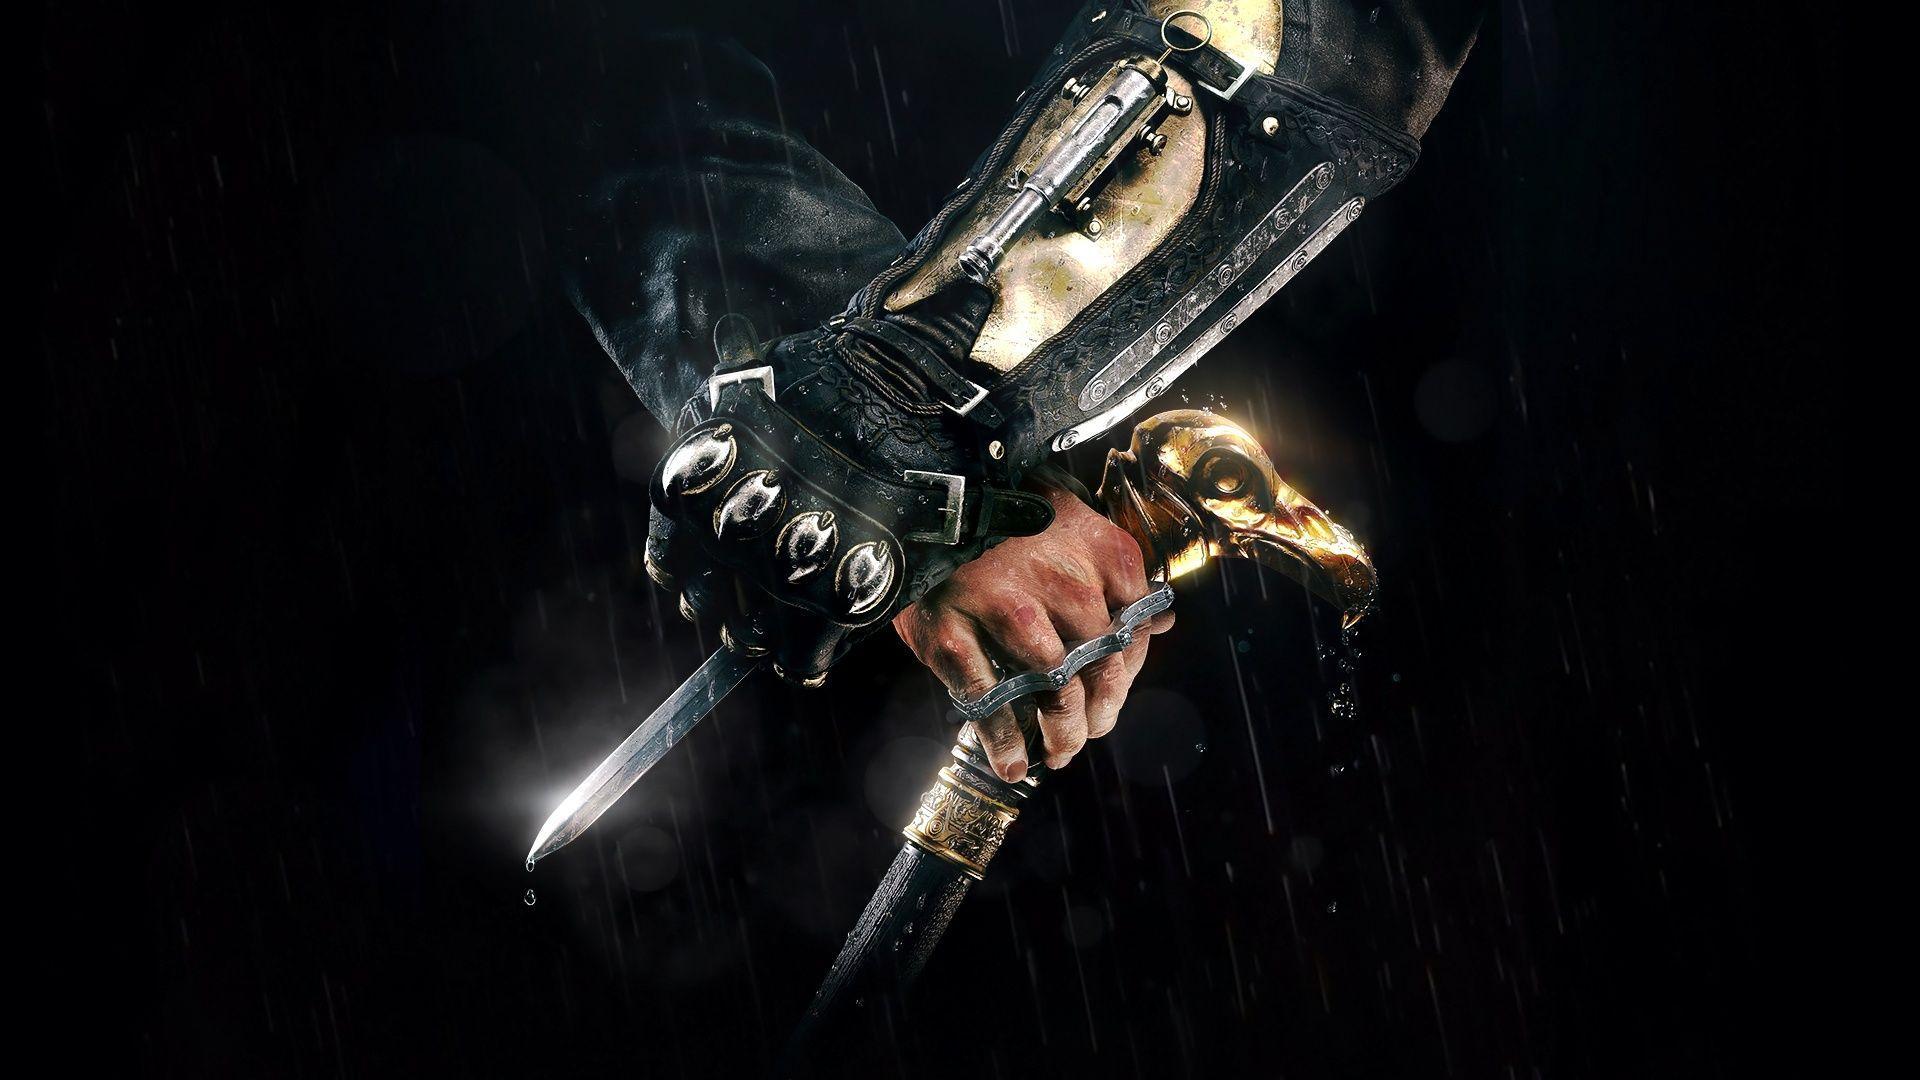 Assassin's Creed: Syndicate HD wallpaper free download